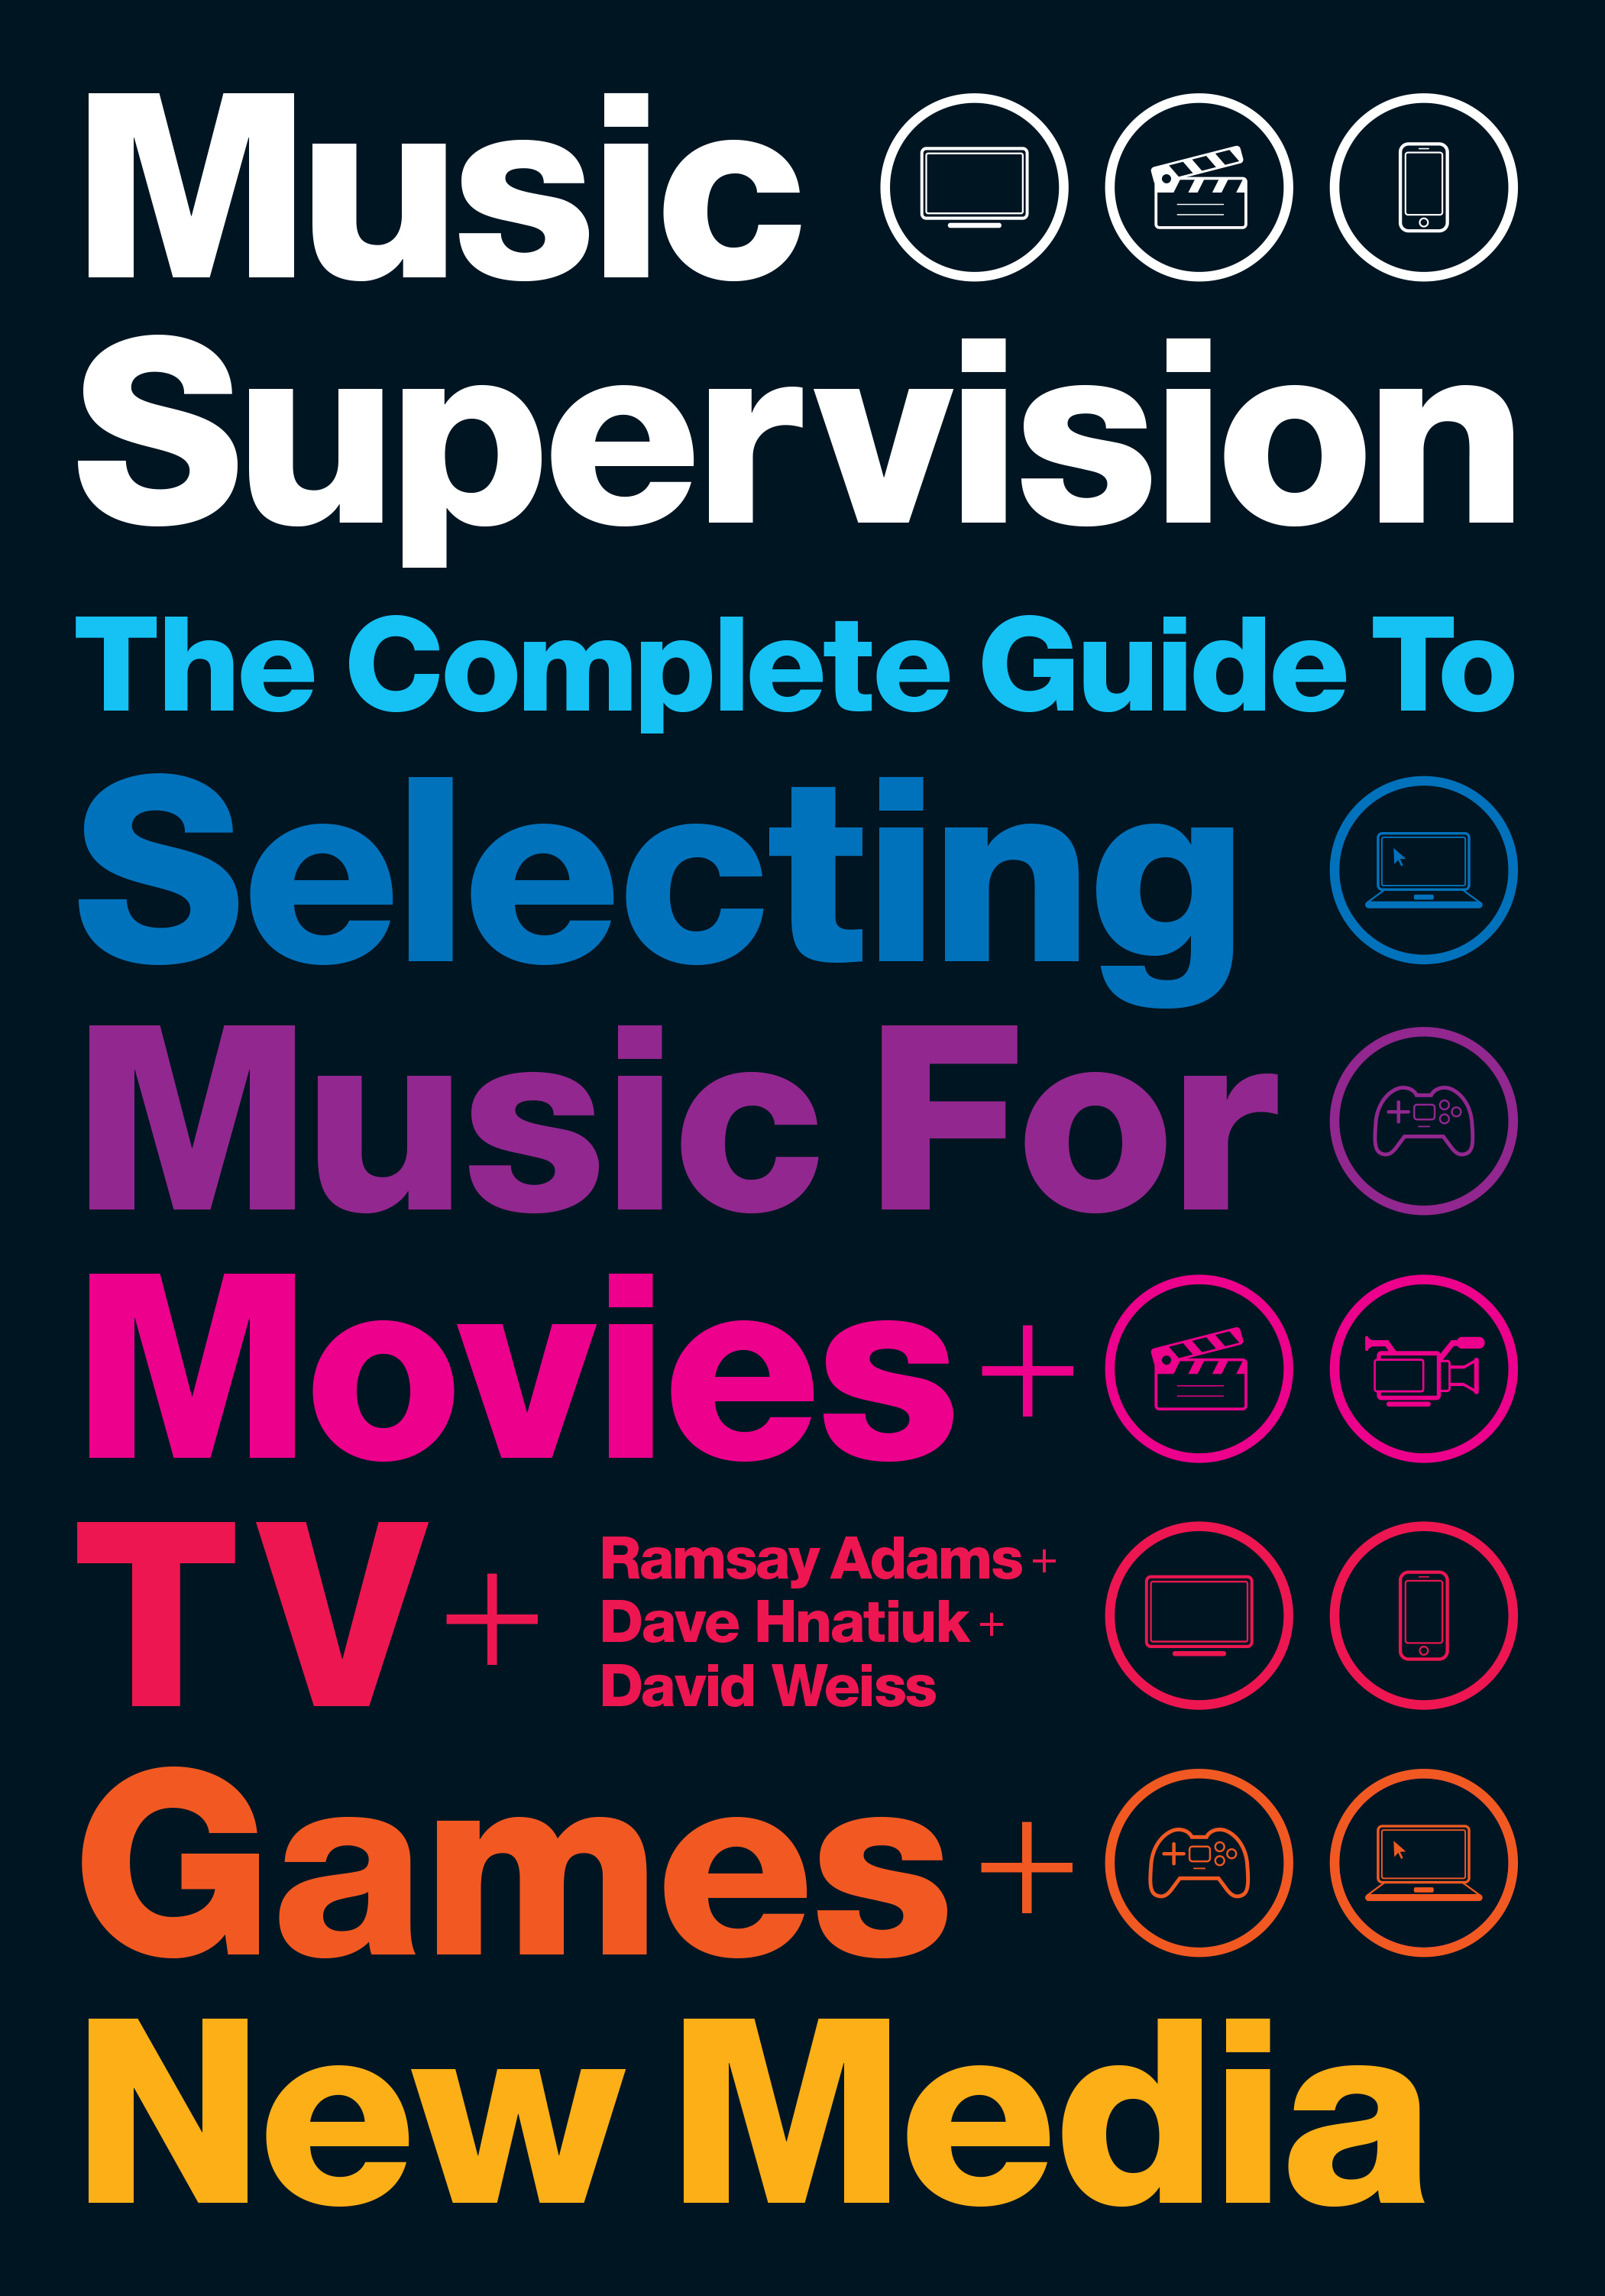 Music Supervision: The Complete Guide to Selecting Music for Movies, TV, Games, & New Media